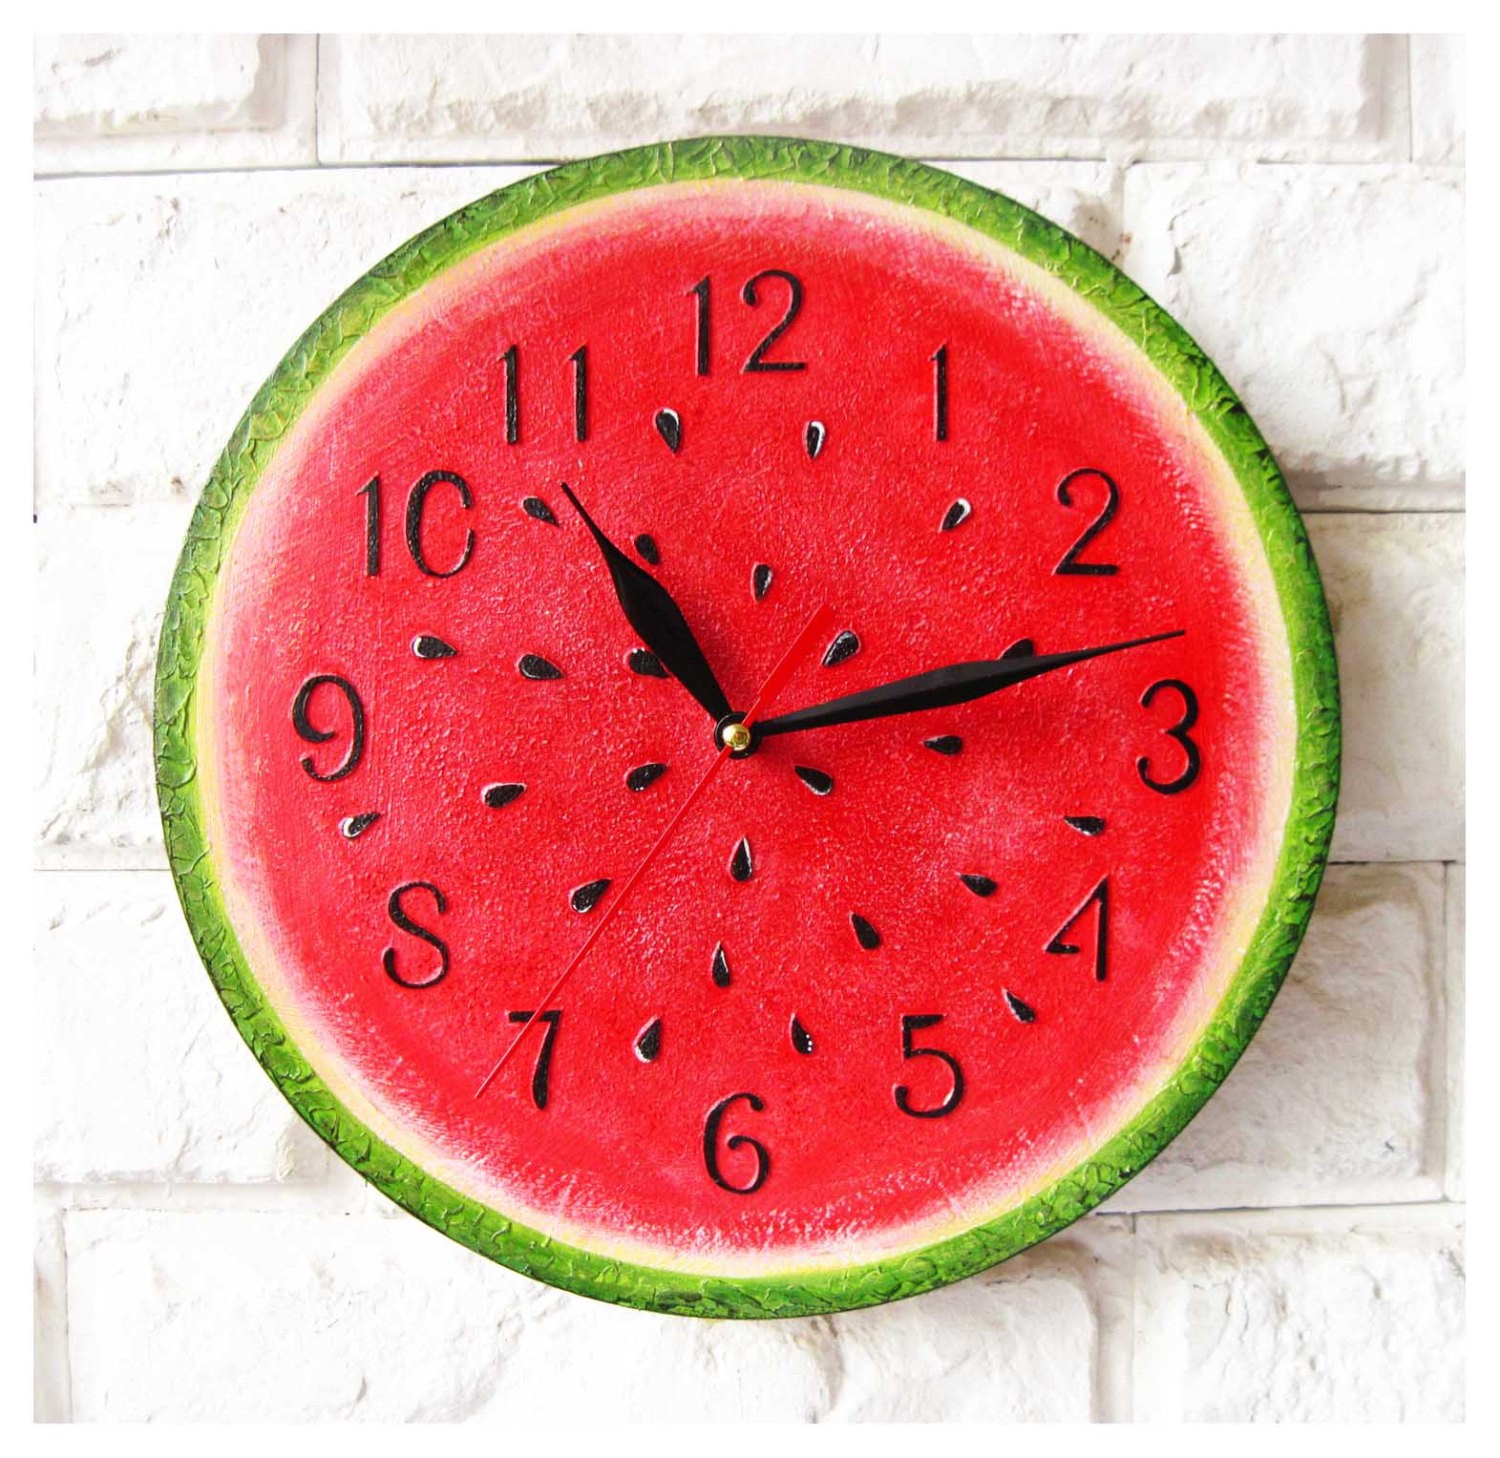 The watermelon wall clock home decor for